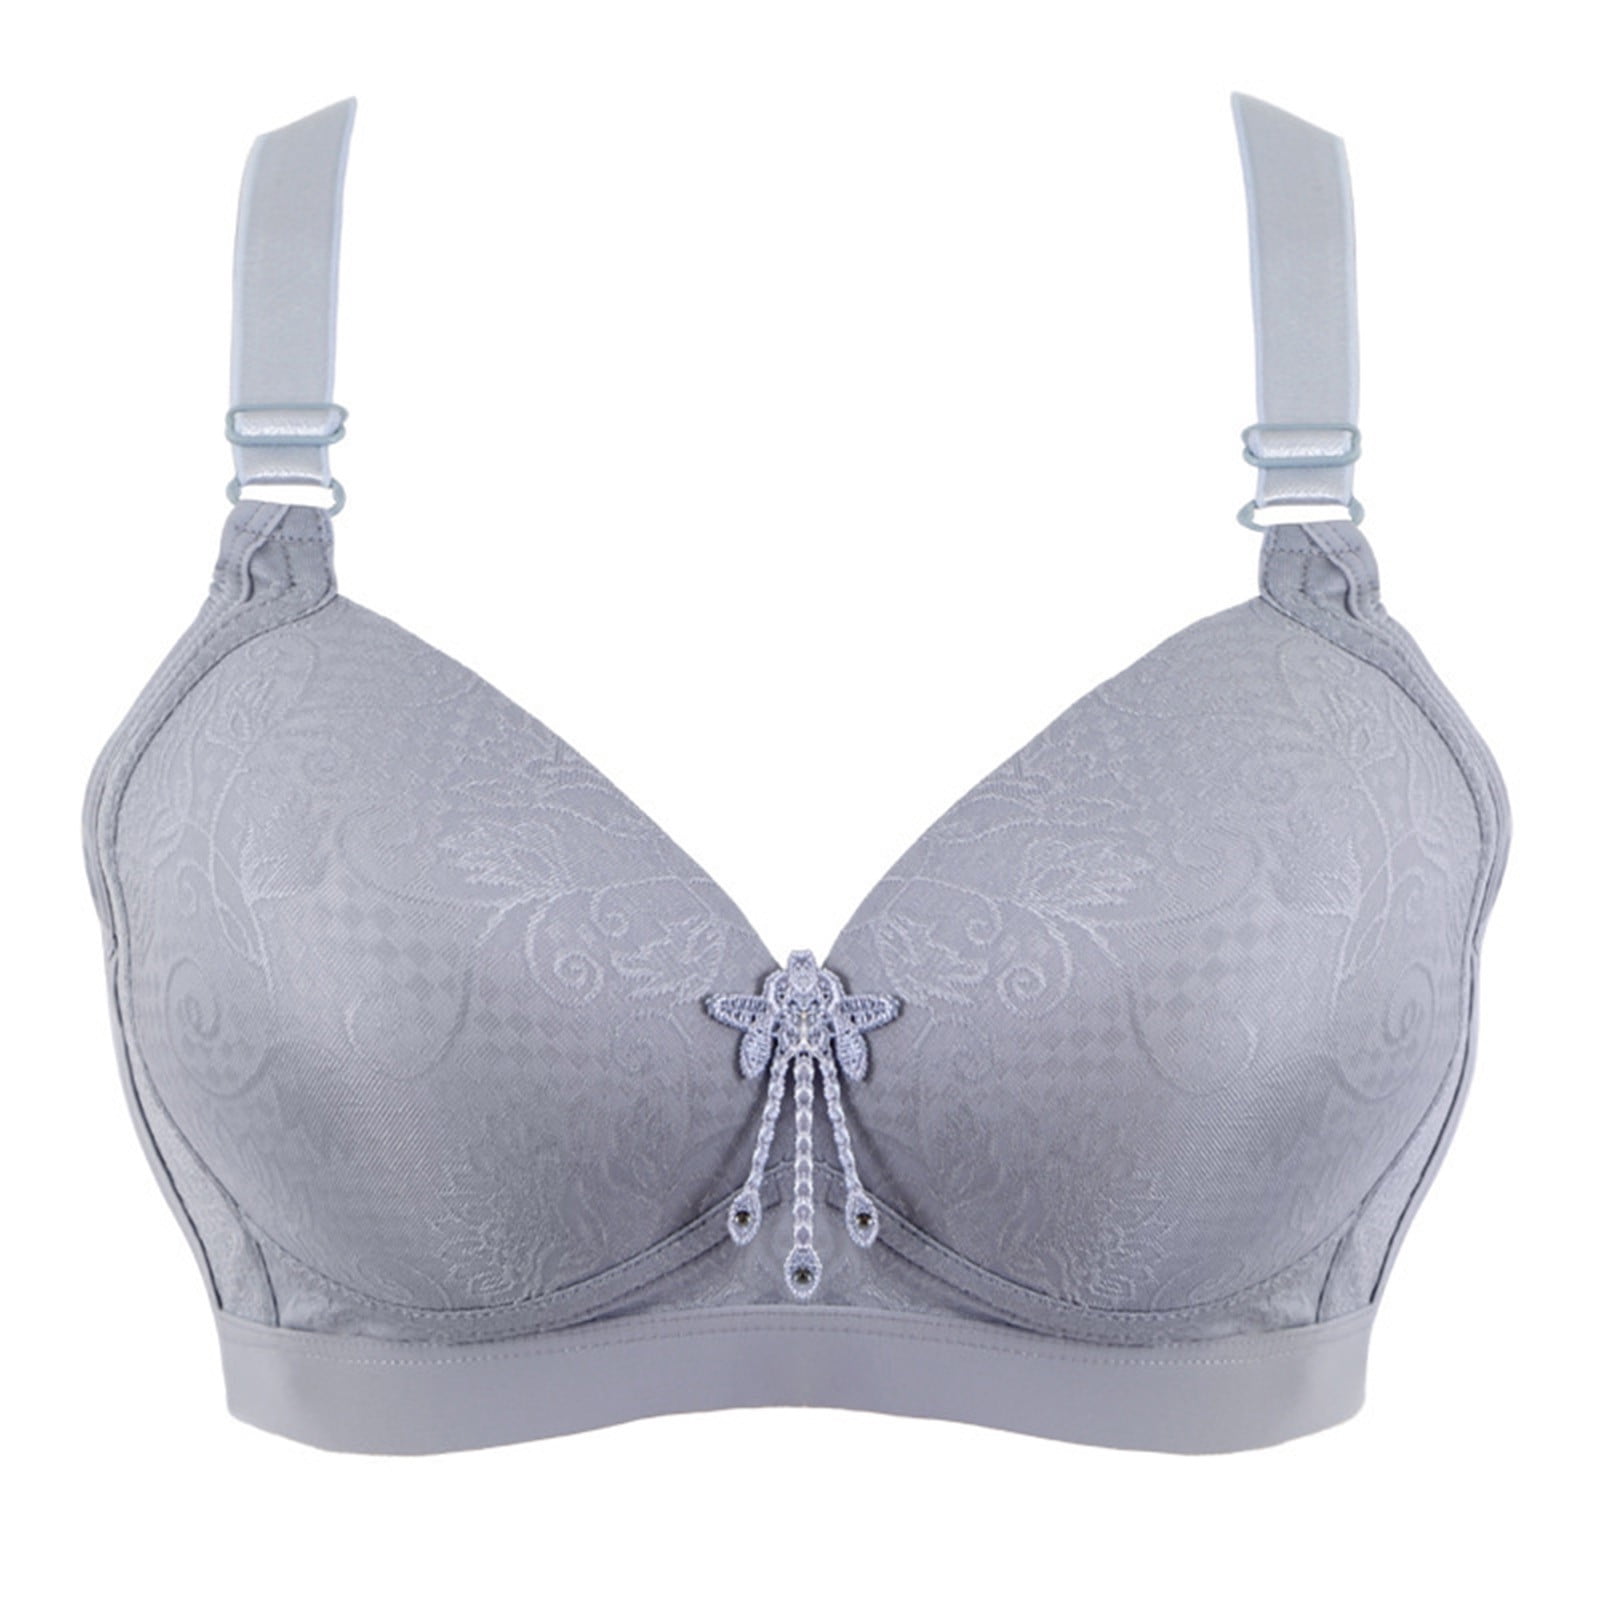 Bigersell Plus Size Push up Bras Sale Clearance Bra for Women No